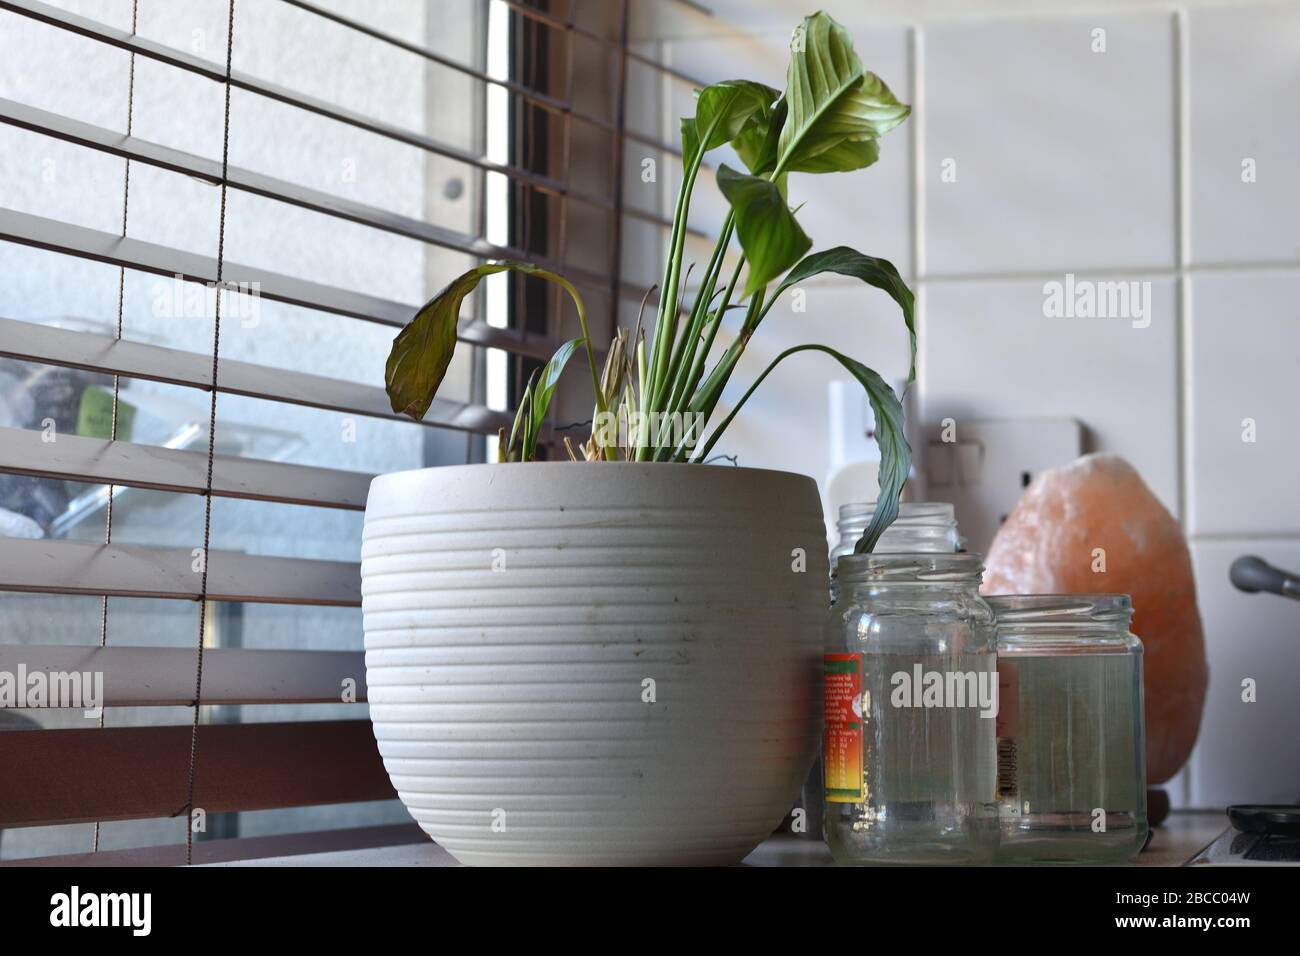 Wilting easter lily amongst assorted kitchen junk next to window blinds Stock Photo